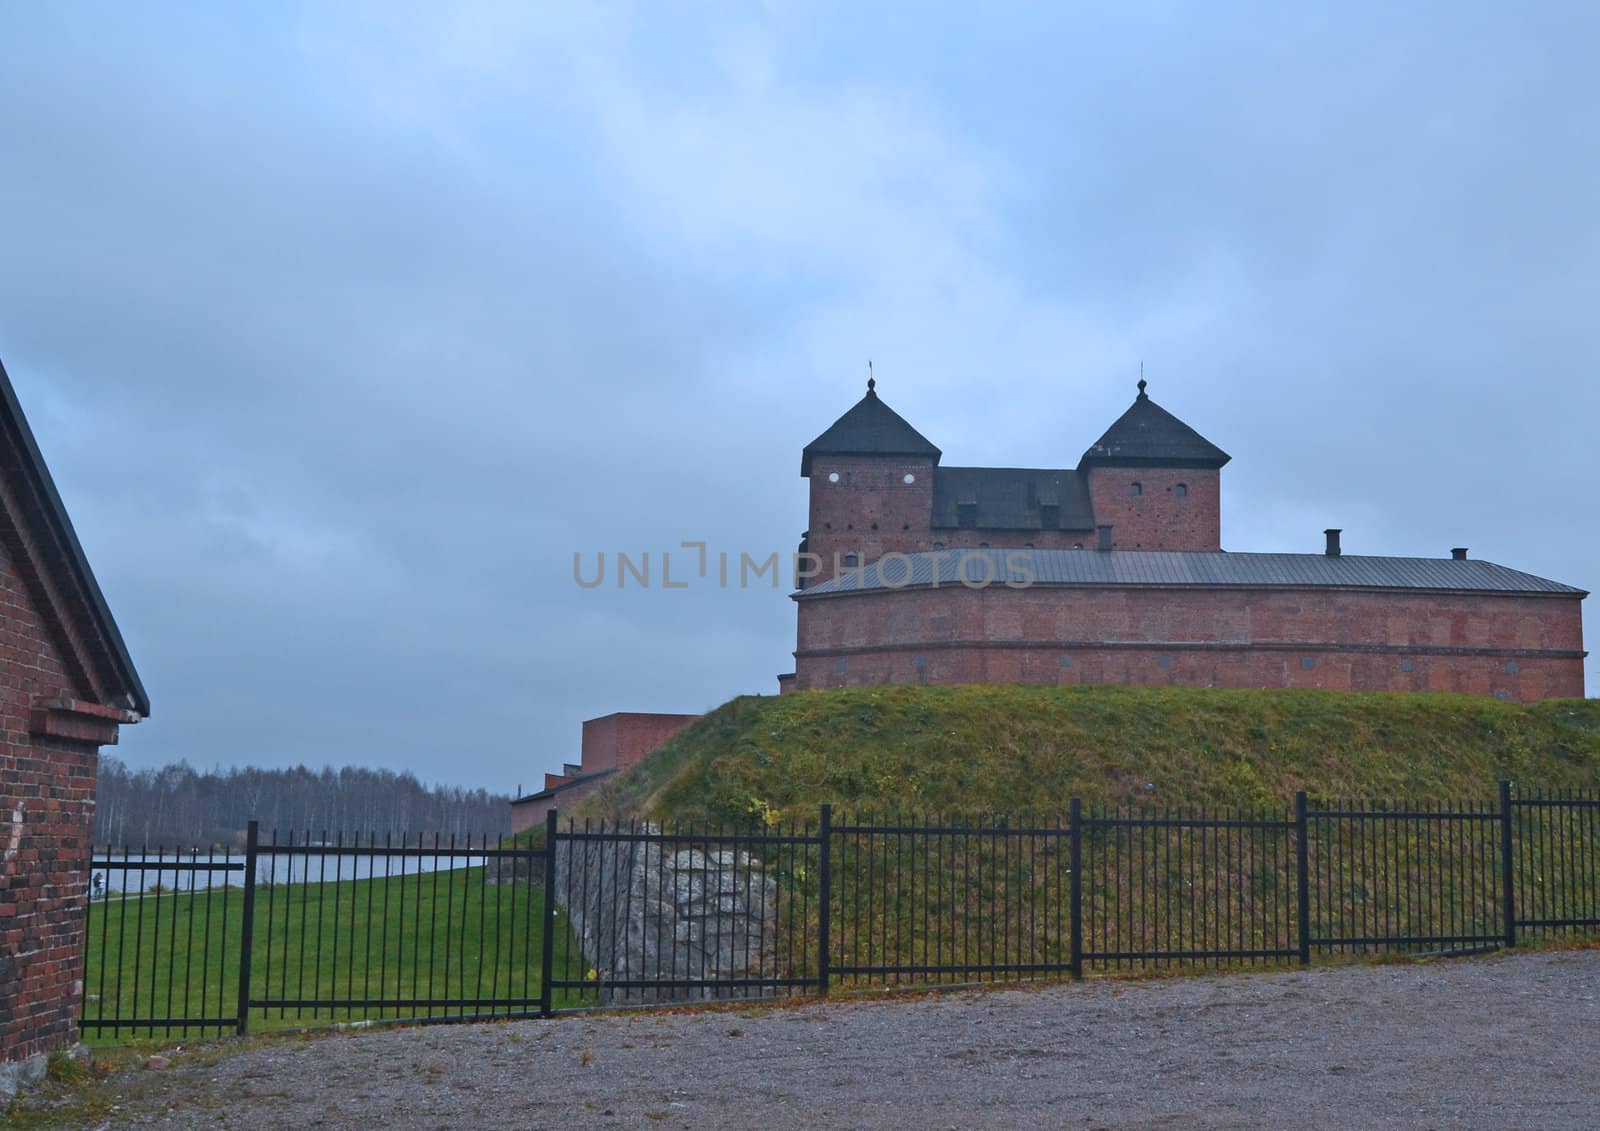 Fortress in which the museum now is located